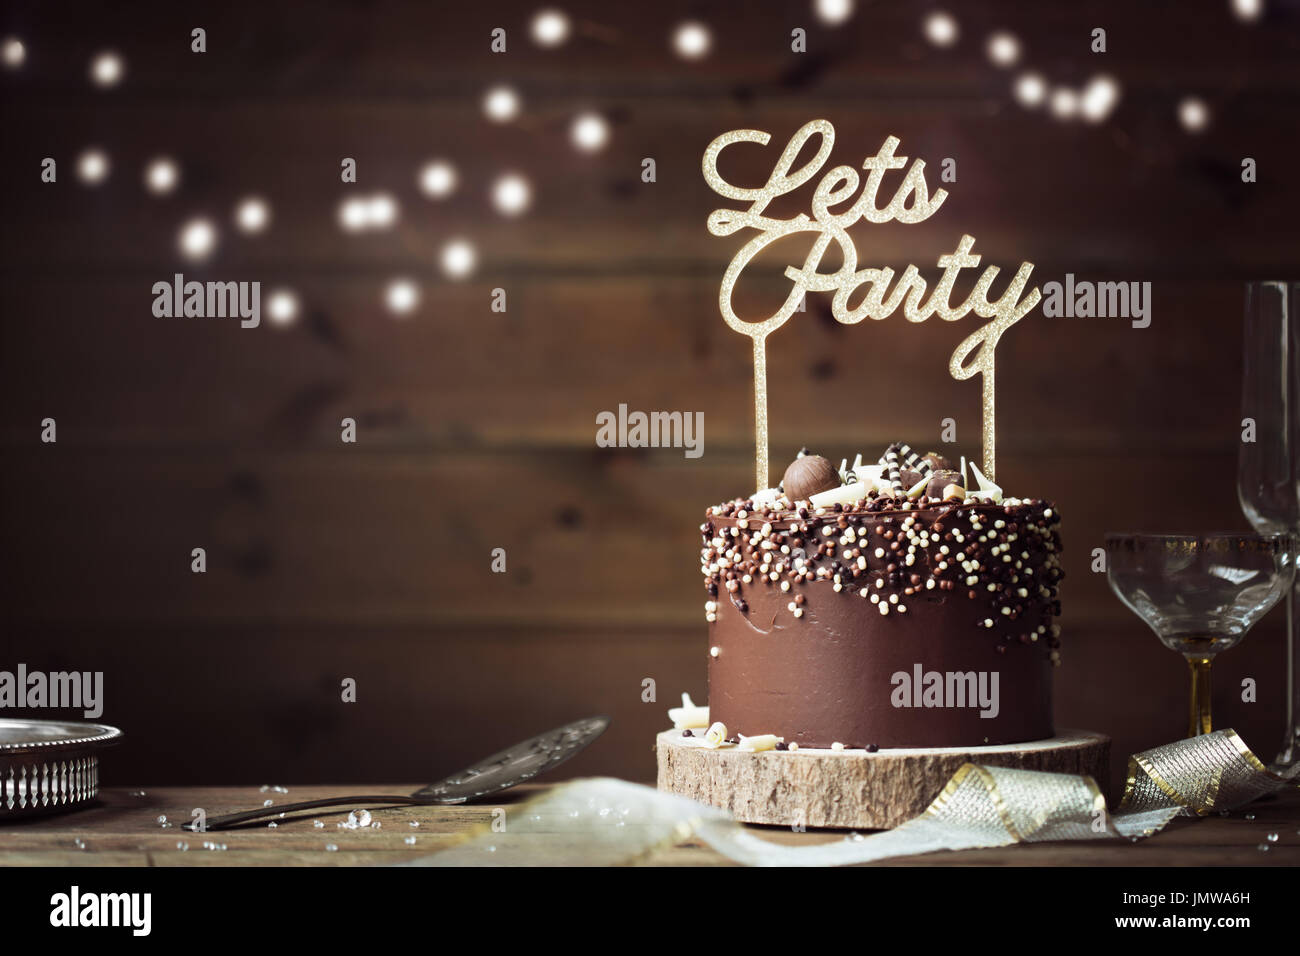 Chocolate celebration cake in a party setting Stock Photo